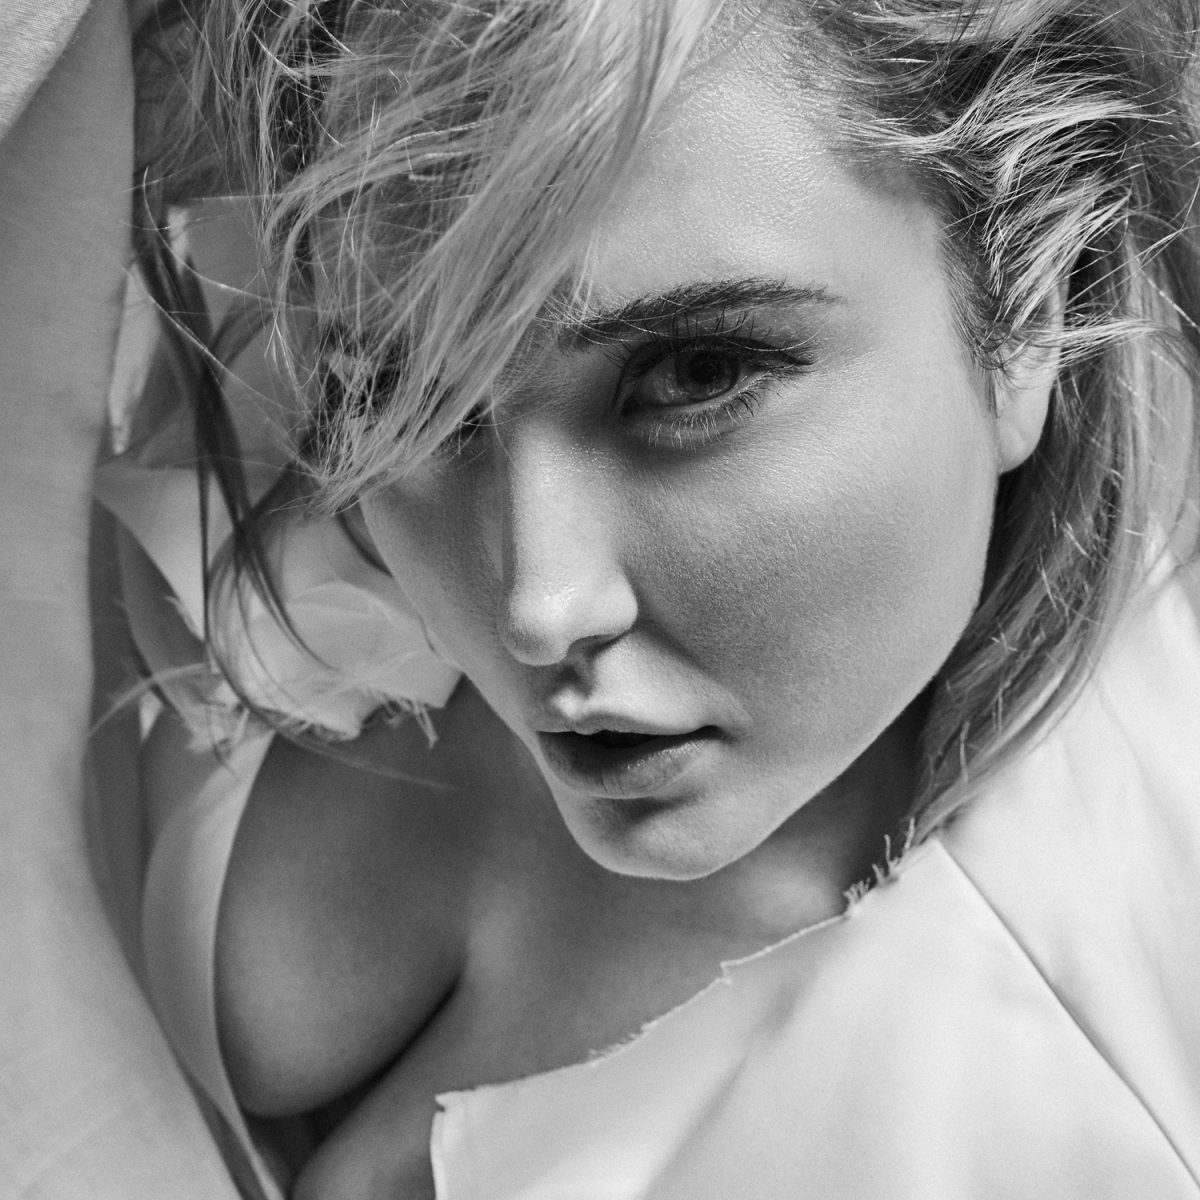 EXCLUSIVE INTERVIEW HAYLEY HASSELHOFF ON BODY POSITIVITY, MENTAL HEALTH AWARENESS, AND HER JOURNEY AS CURVE MODEL AND ACTIVIST THE UNTITLED MAGAZINE pic